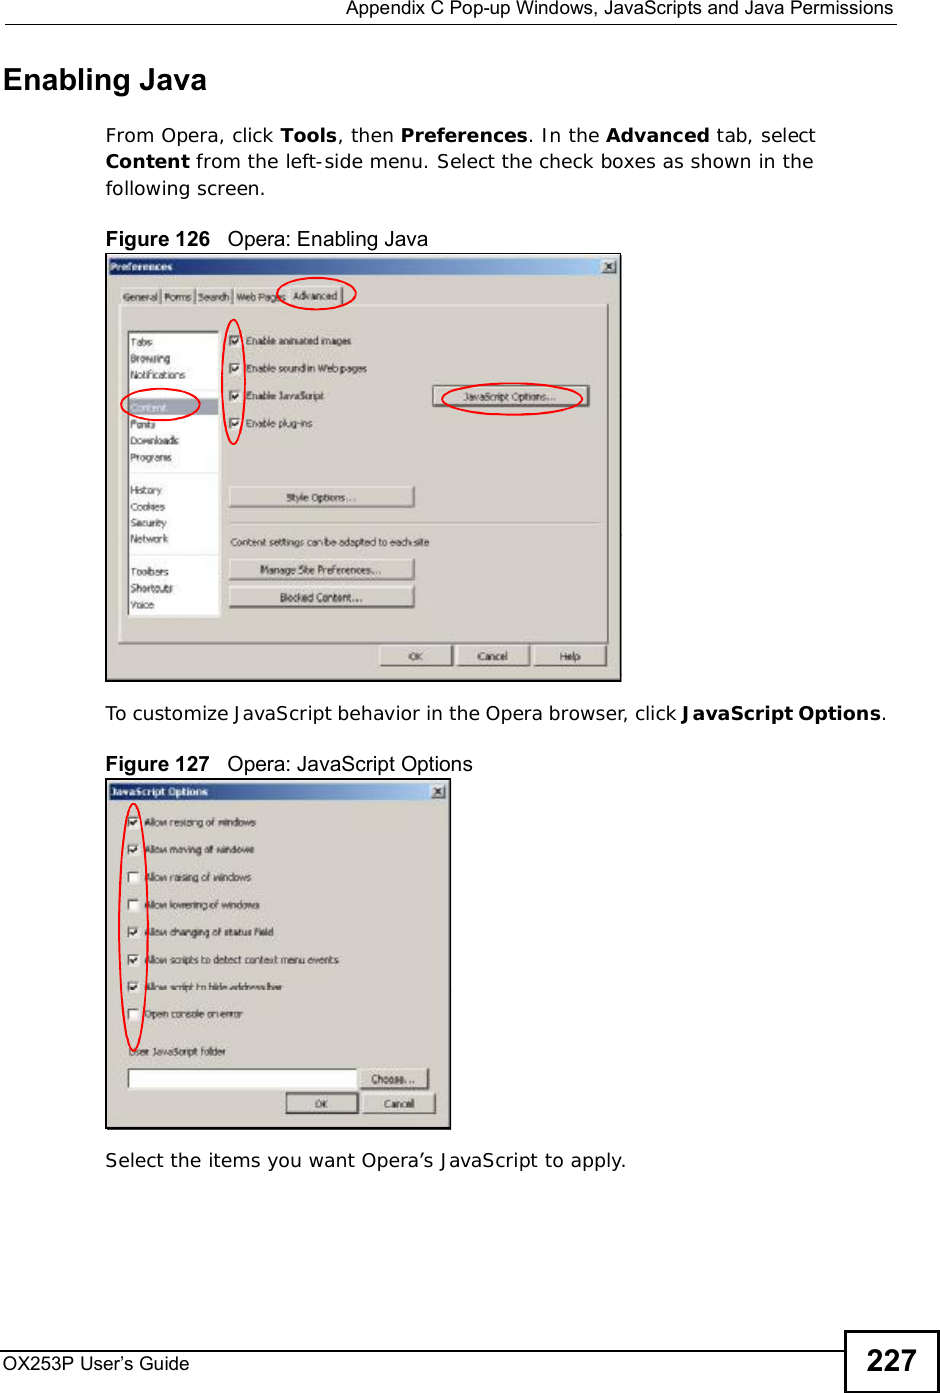  Appendix CPop-up Windows, JavaScripts and Java PermissionsOX253P User’s Guide 227Enabling JavaFrom Opera, click Tools, then Preferences. In the Advanced tab, select Content from the left-side menu. Select the check boxes as shown in the following screen.Figure 126   Opera: Enabling JavaTo customize JavaScript behavior in the Opera browser, click JavaScript Options.Figure 127   Opera: JavaScript OptionsSelect the items you want Opera’s JavaScript to apply.